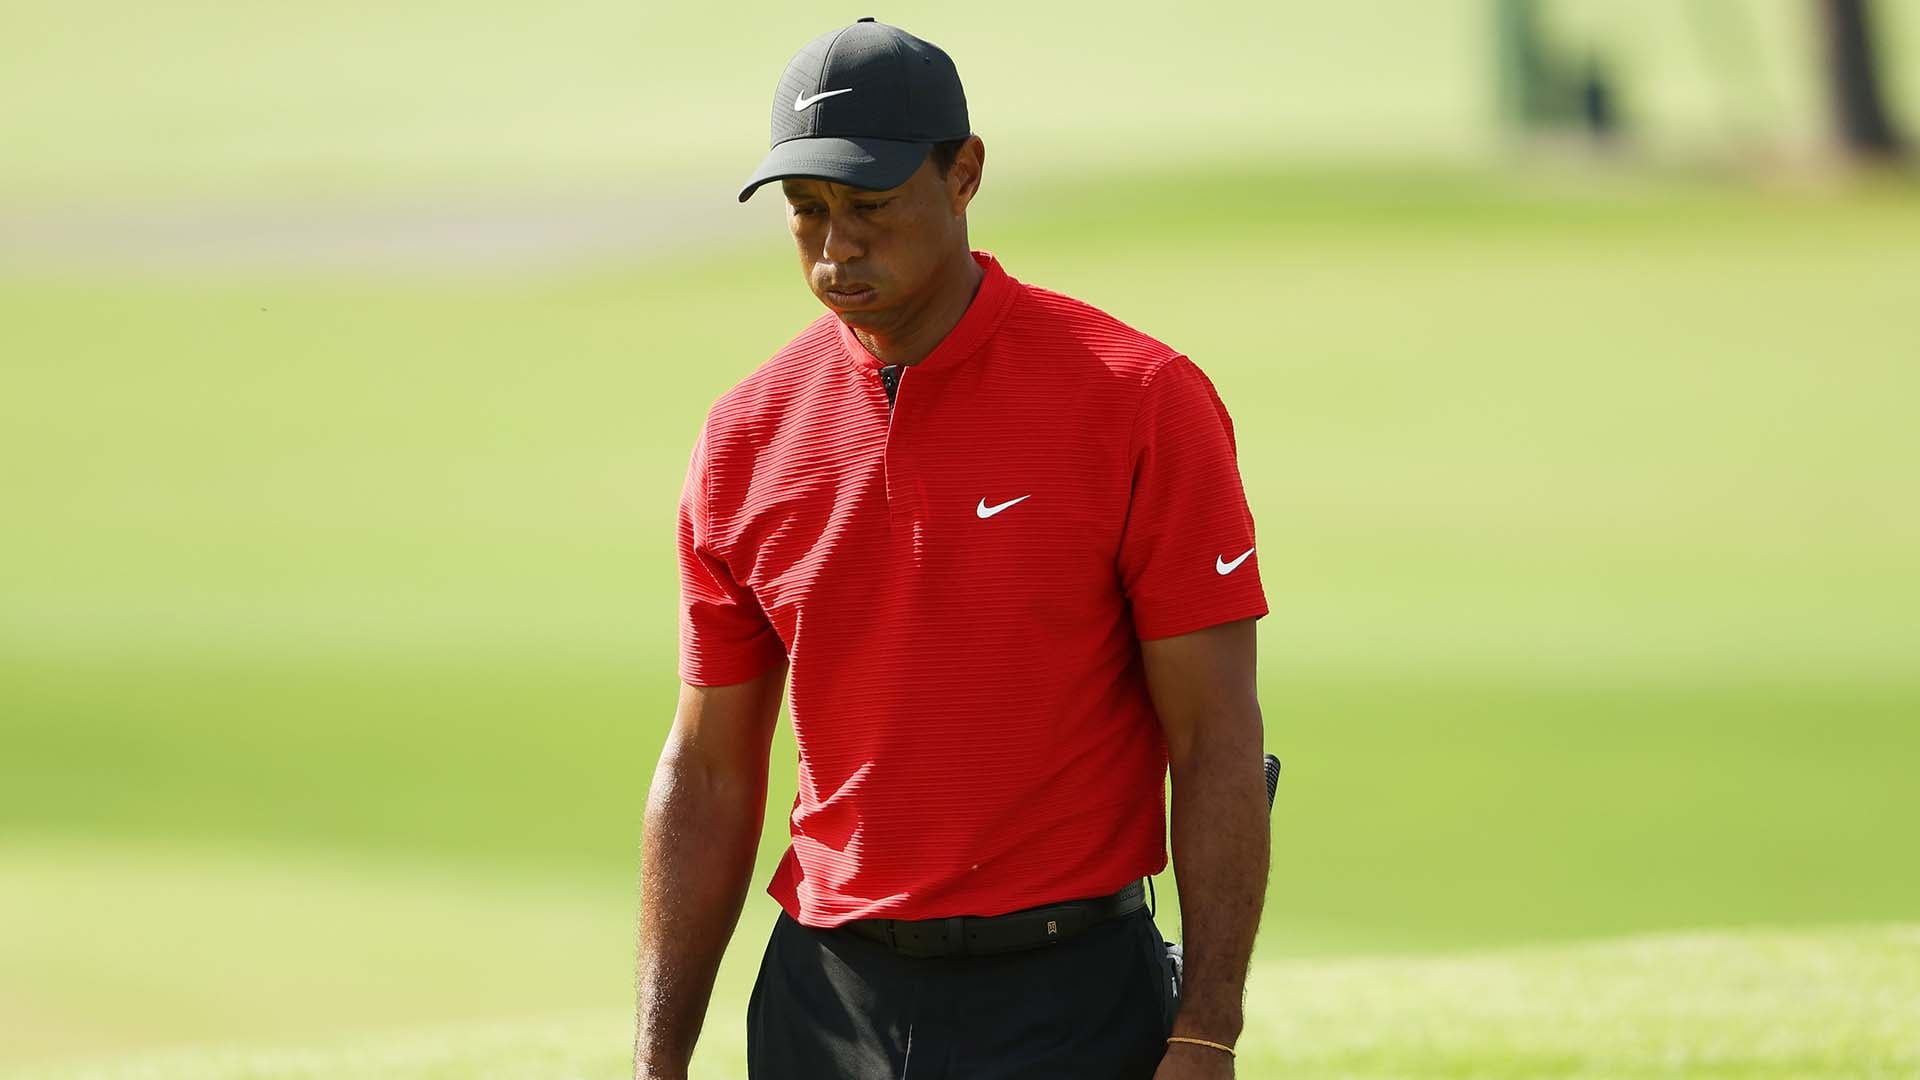 Tiger Woods announces another back surgery, to miss Farmers and Genesis